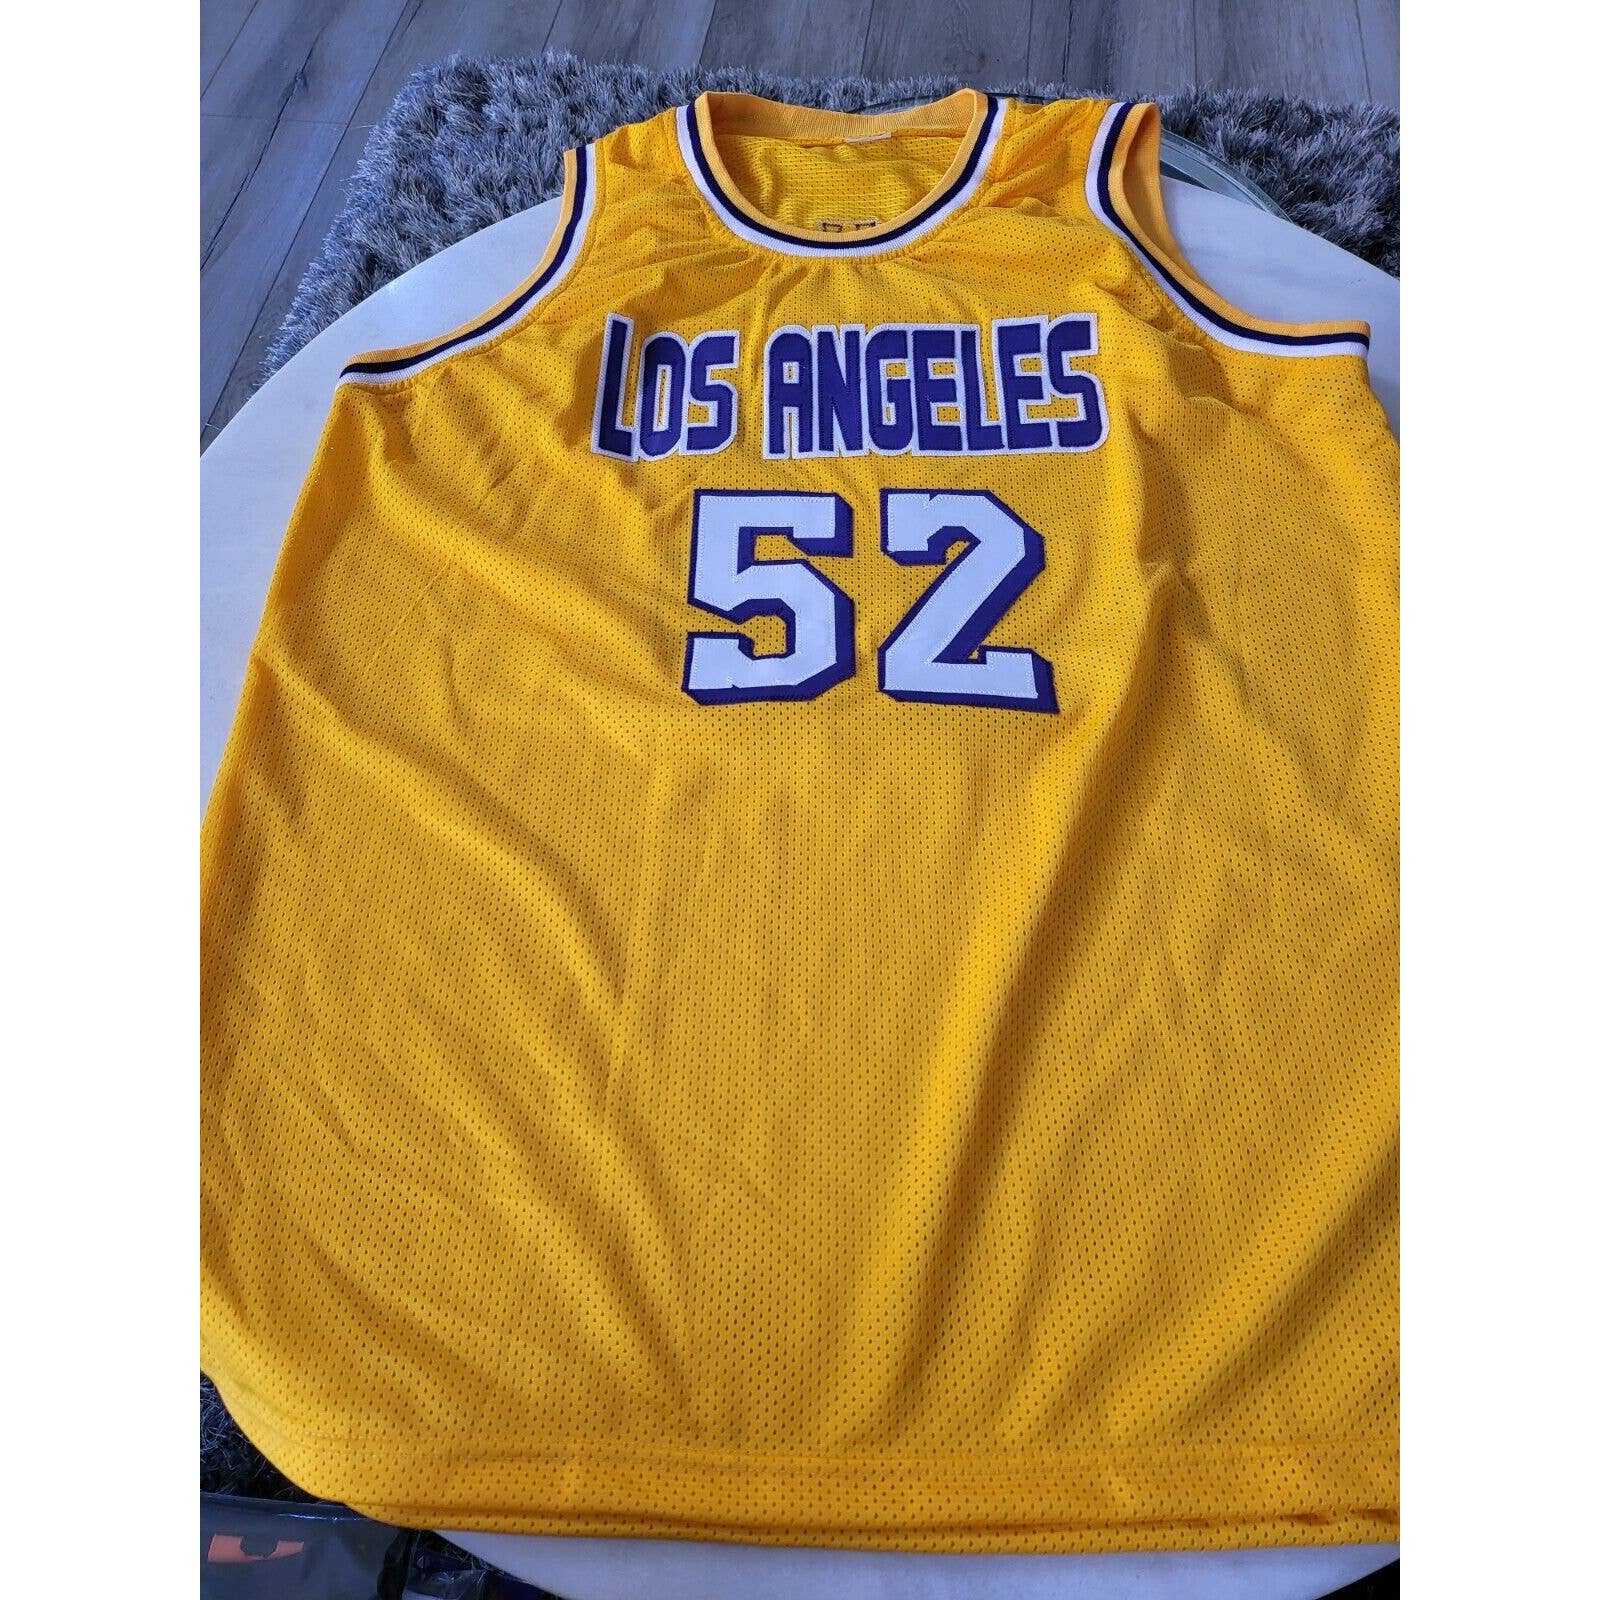 Jamaal Wilkes Autographed/Signed Jersey PSA/DNA Sticker Los Angeles Lakers LA - TreasuresEvolved